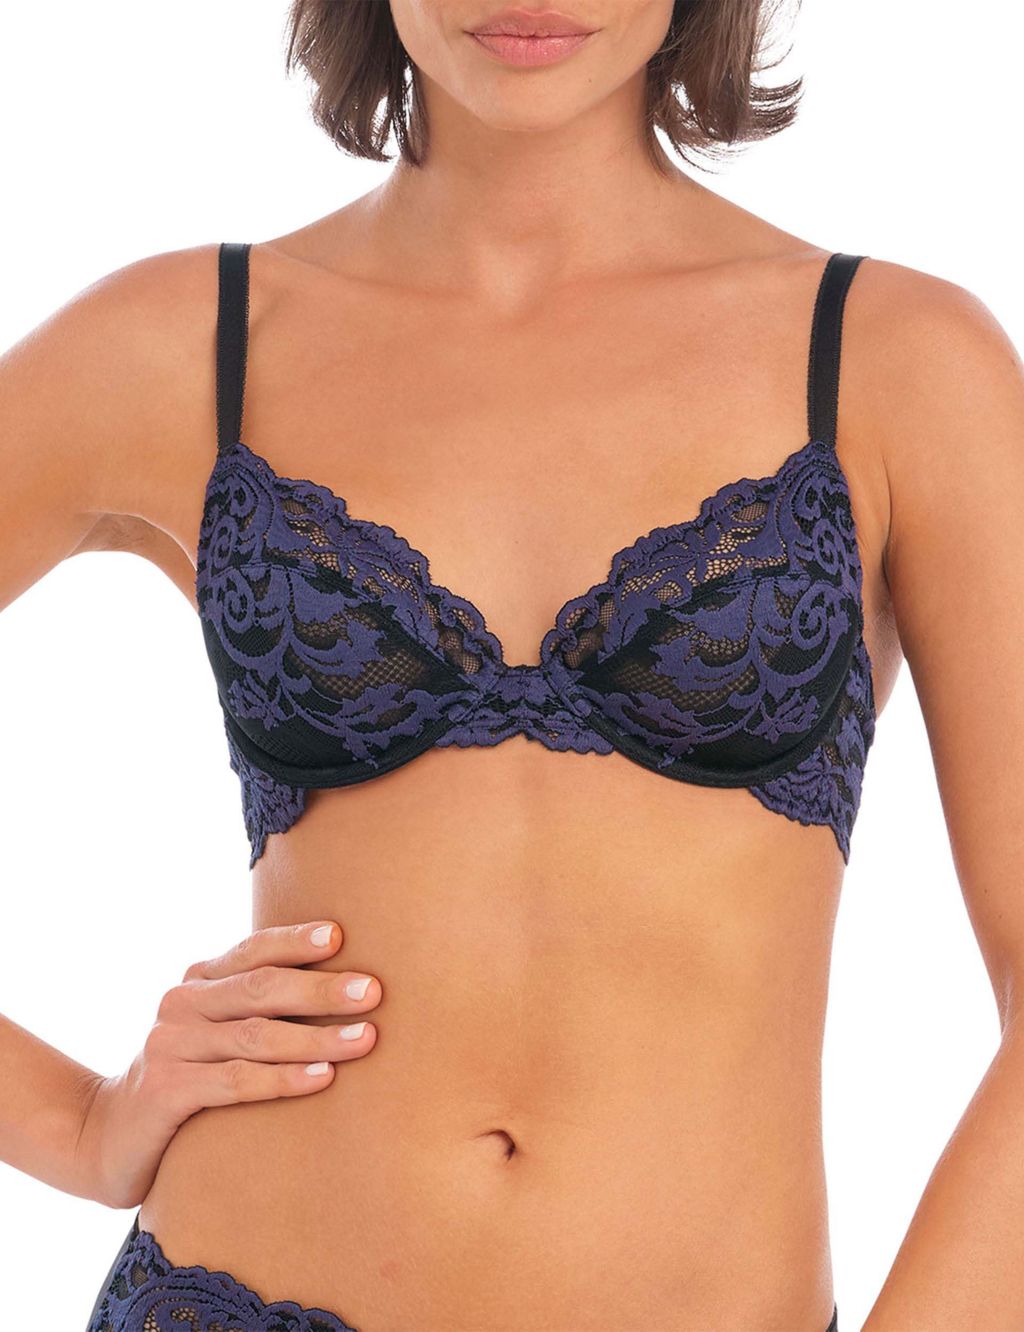 Instant Icon Floral Lace Wired Plunge Bra image 1